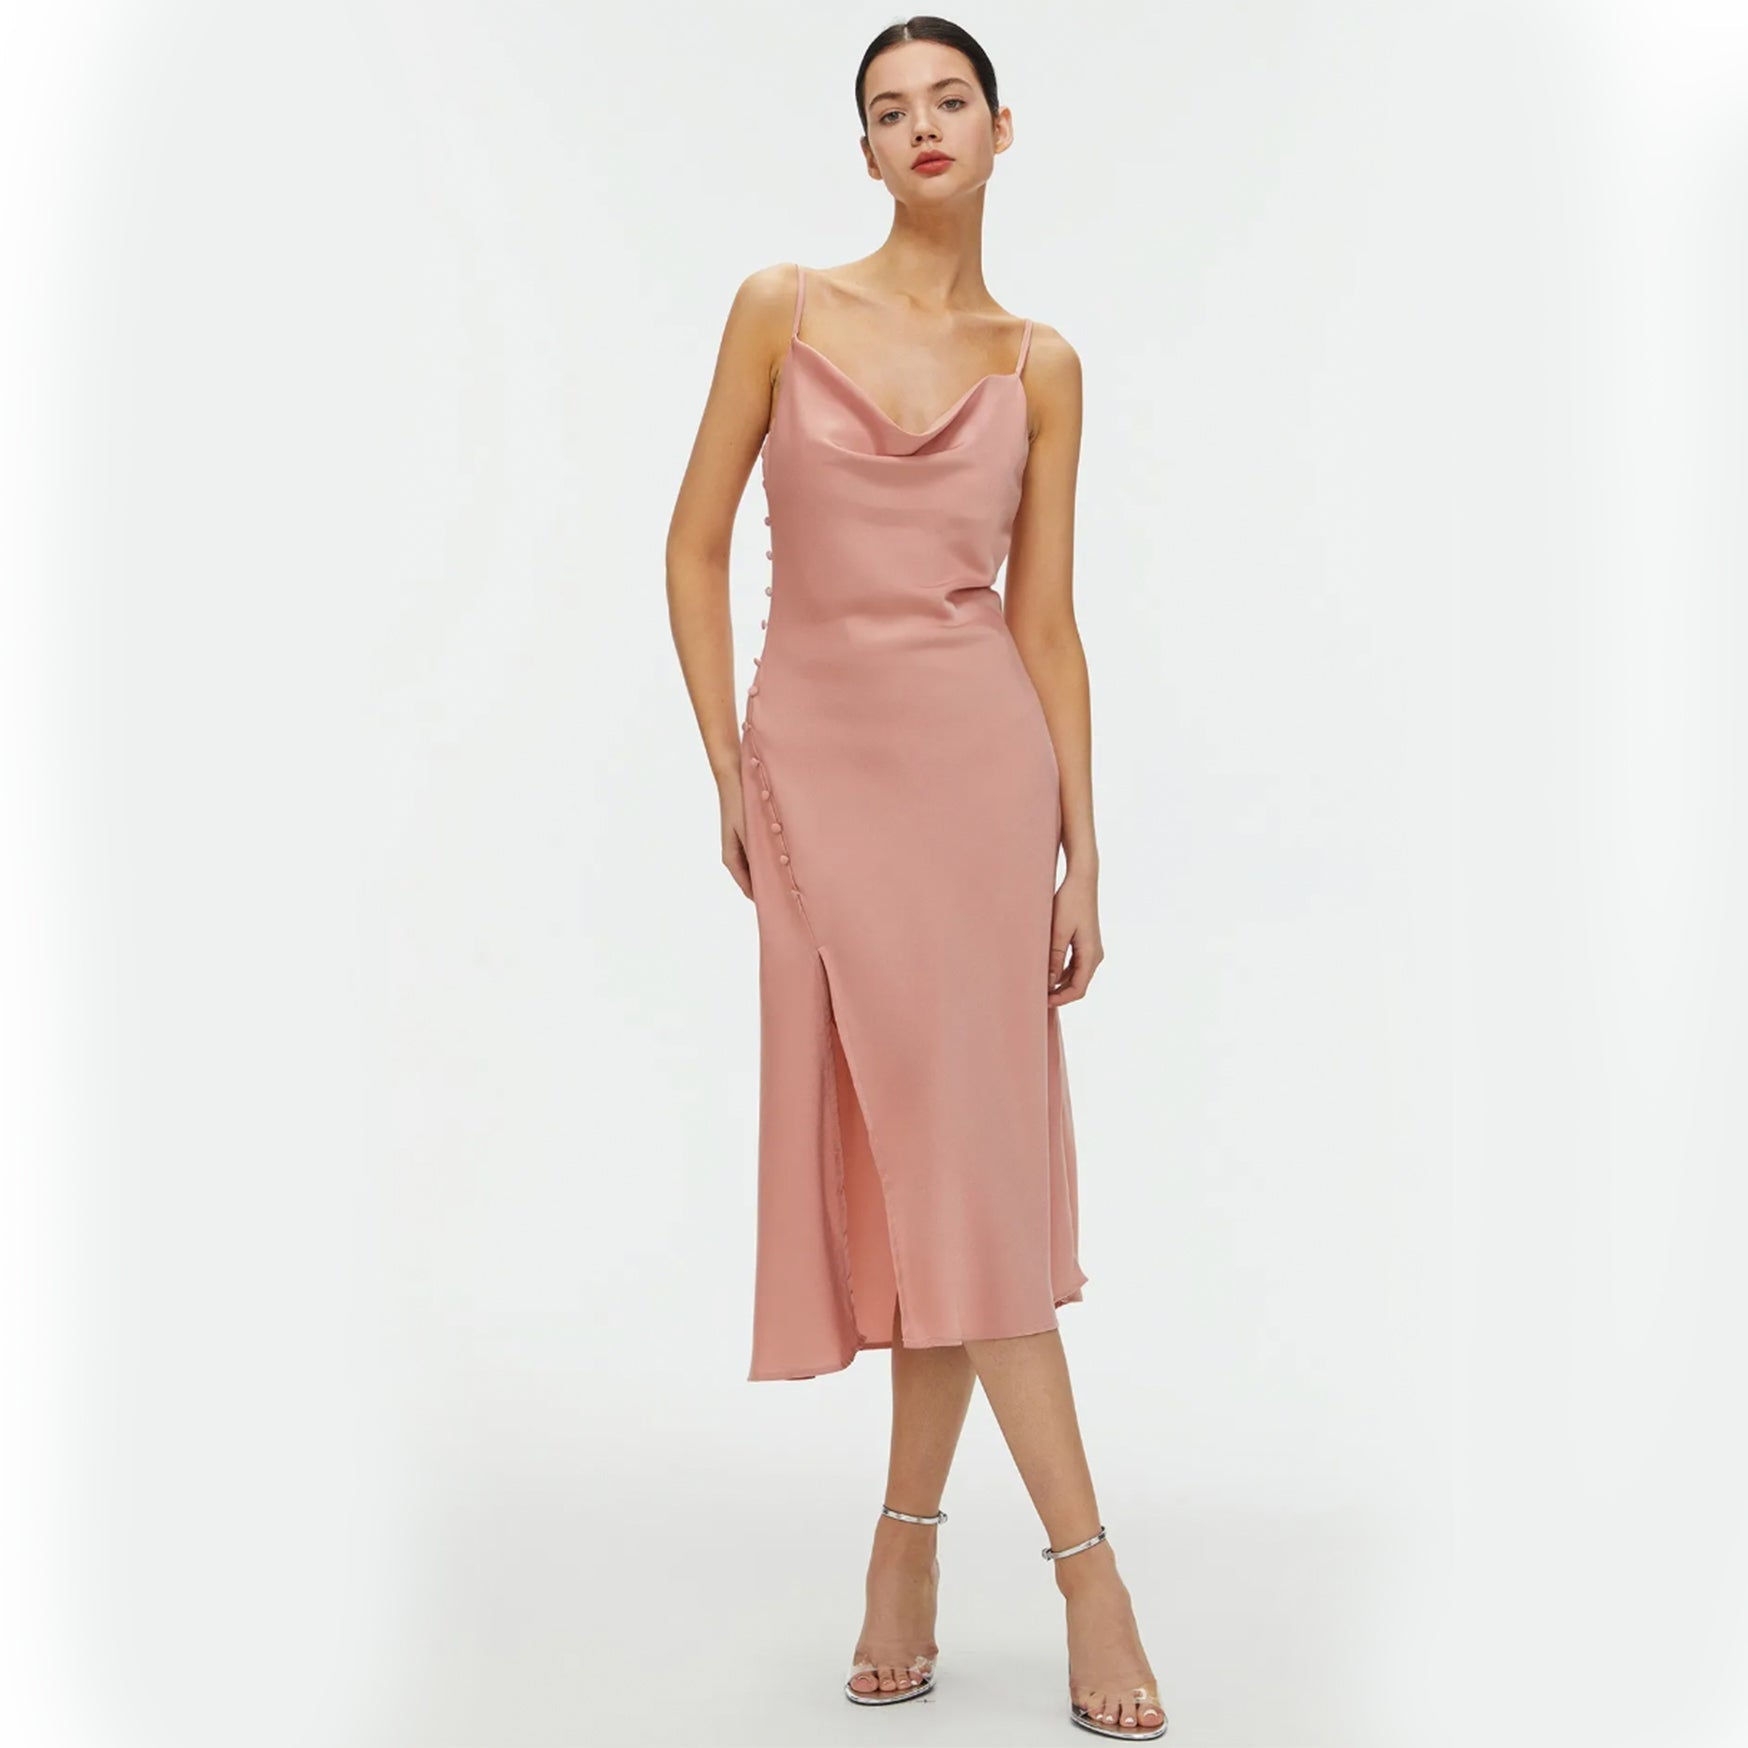 Buttoned Satin Slip Dress With Slit - Pink M